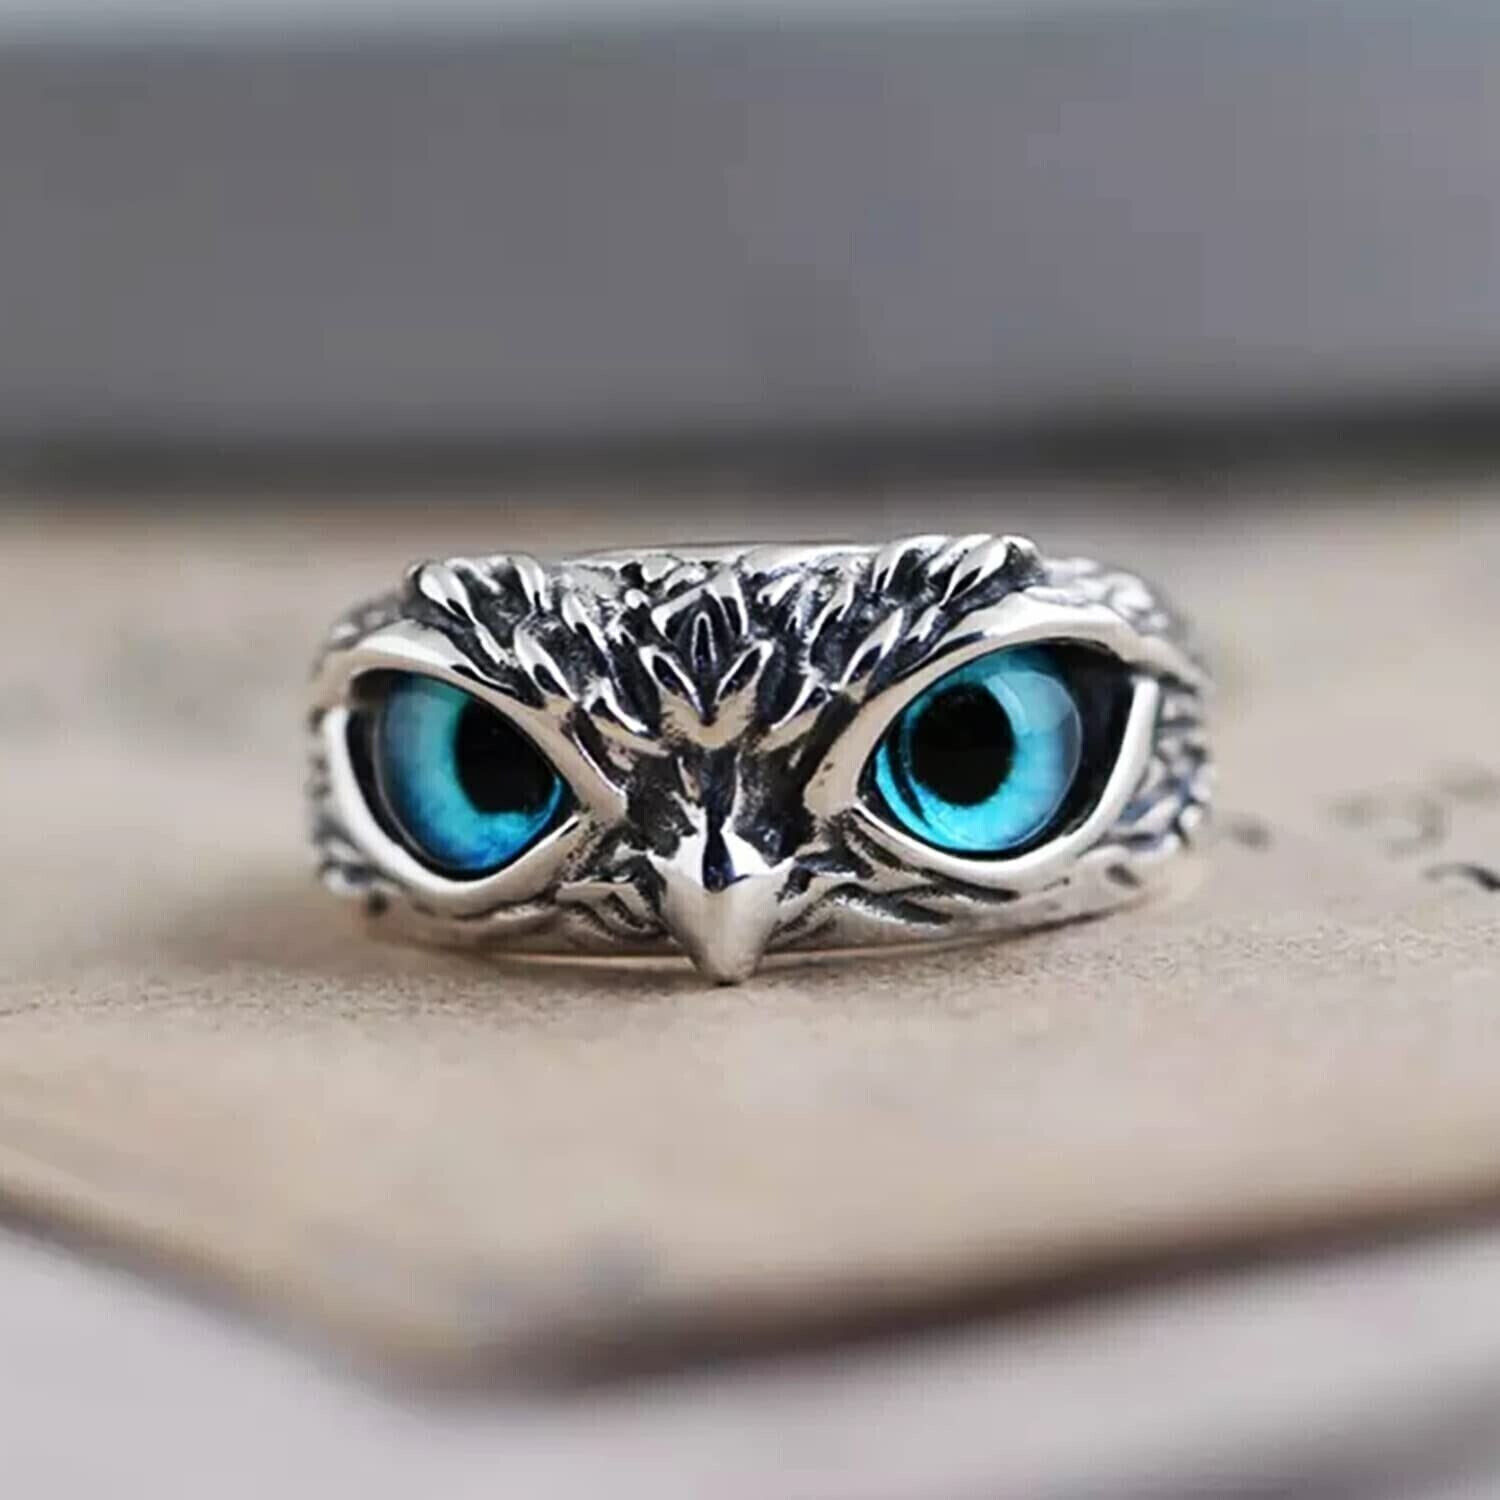 Blessed 100 % Work Stylish Owl Skull Stylish Silver King Owl Ring Good luck A++